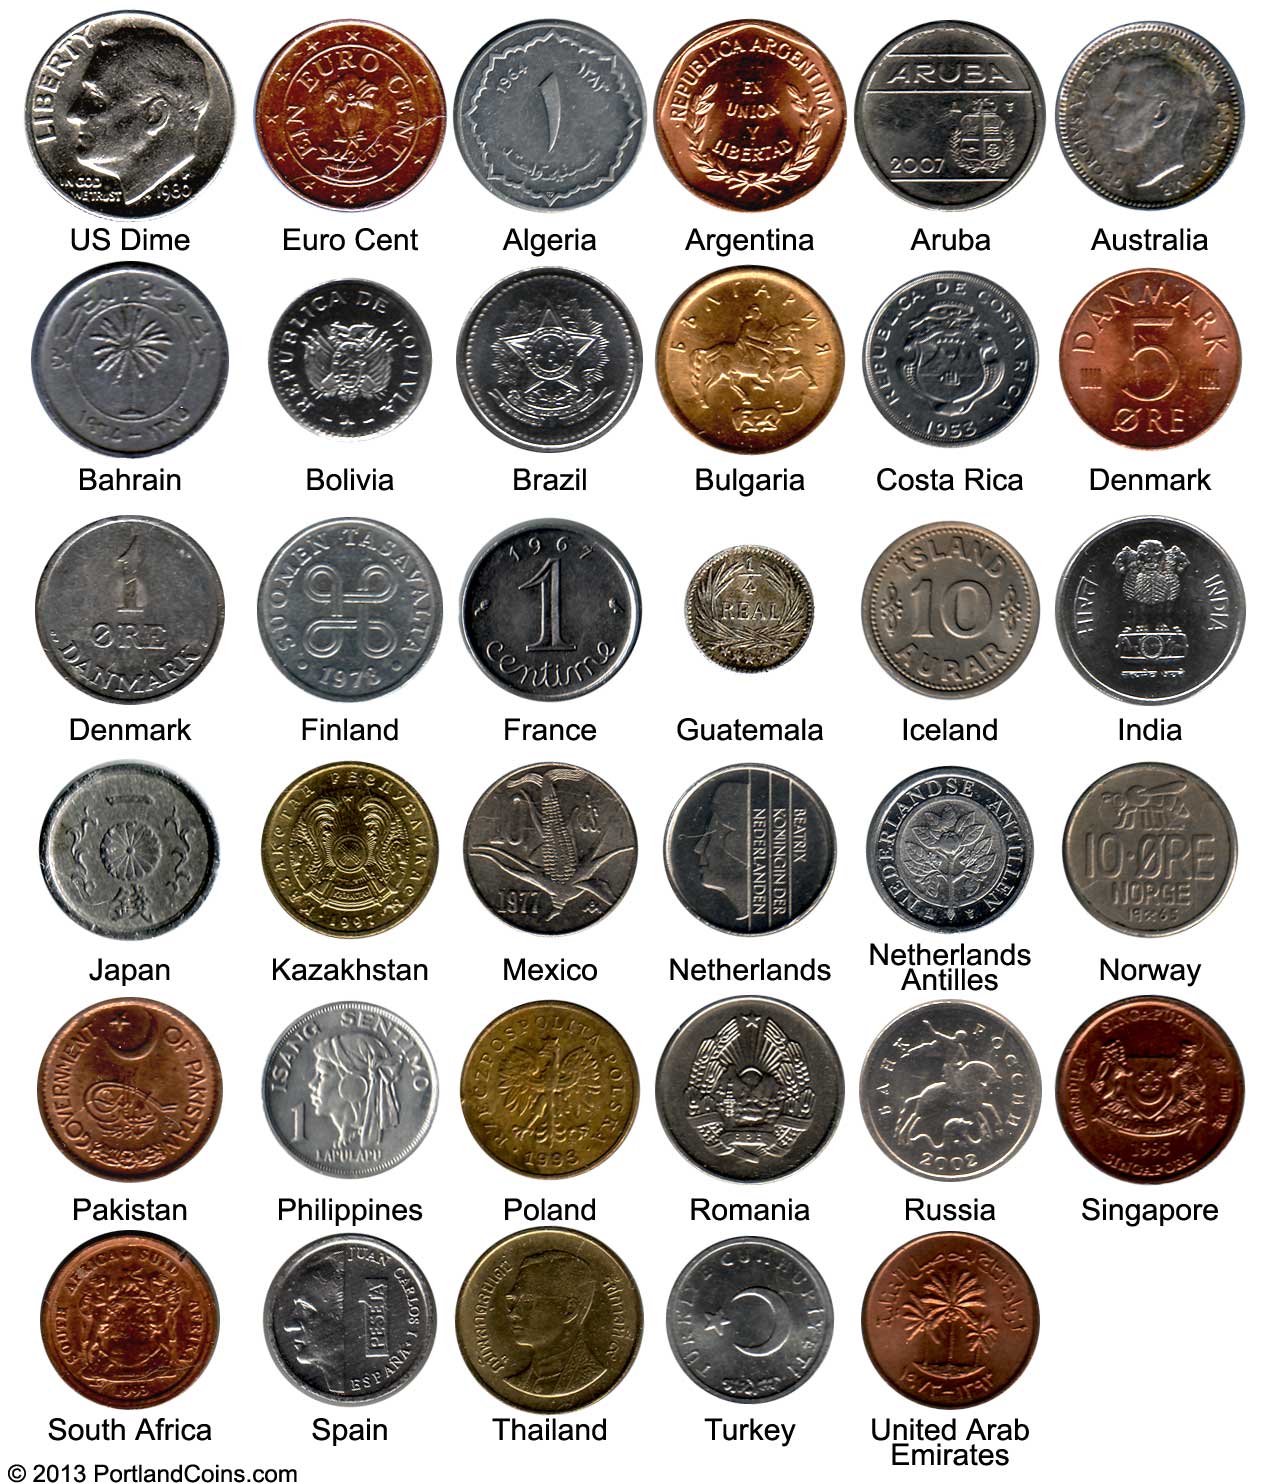 Coin Collection of 50 Unique Coins from around the world